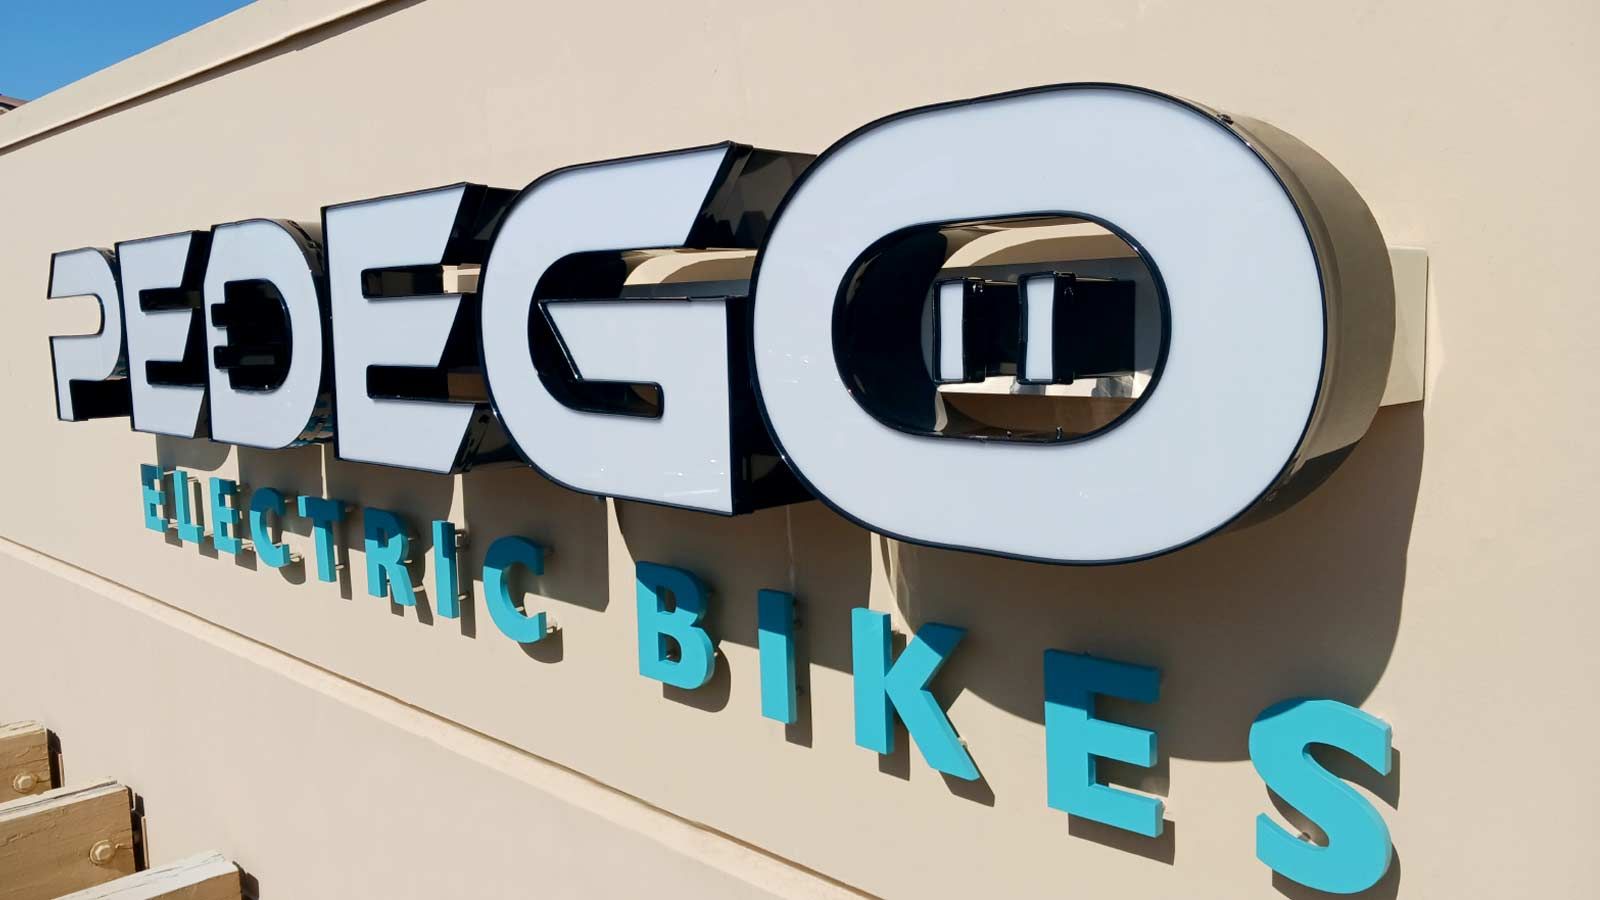 Pedego Electric Bikes 3D signs installed outdoors